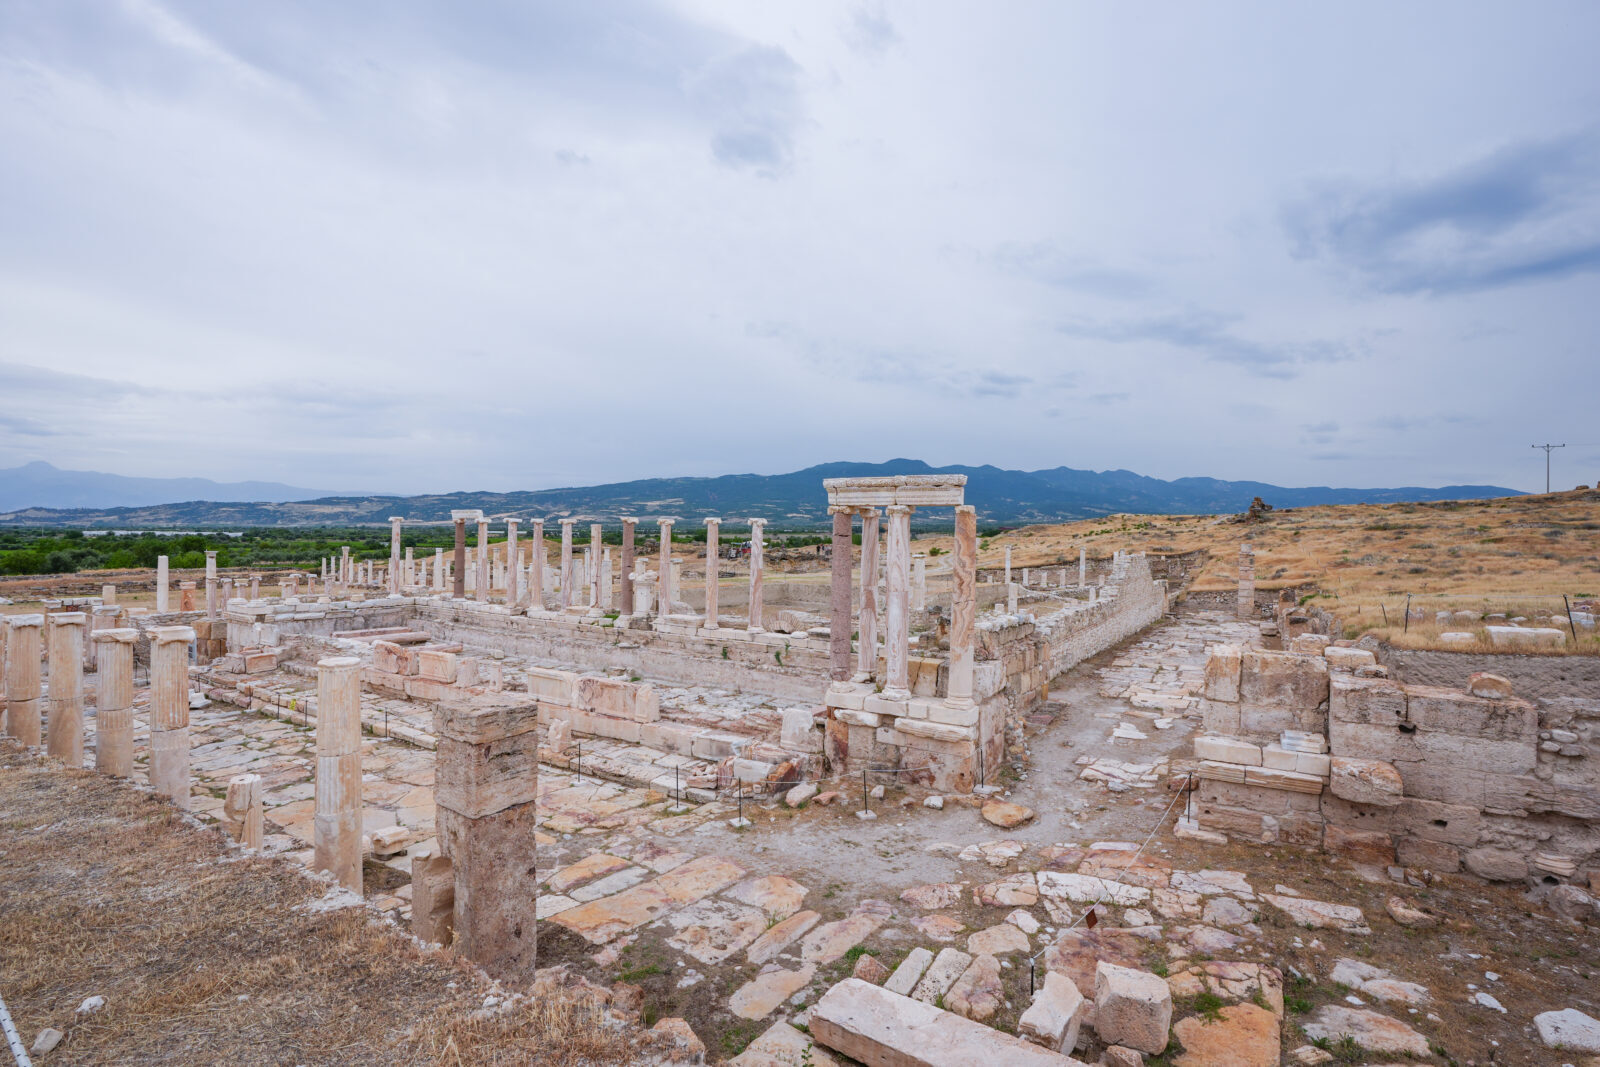 Archaeologists reveal 2,000-year-old Roman artifacts in Denizli's Tripolis